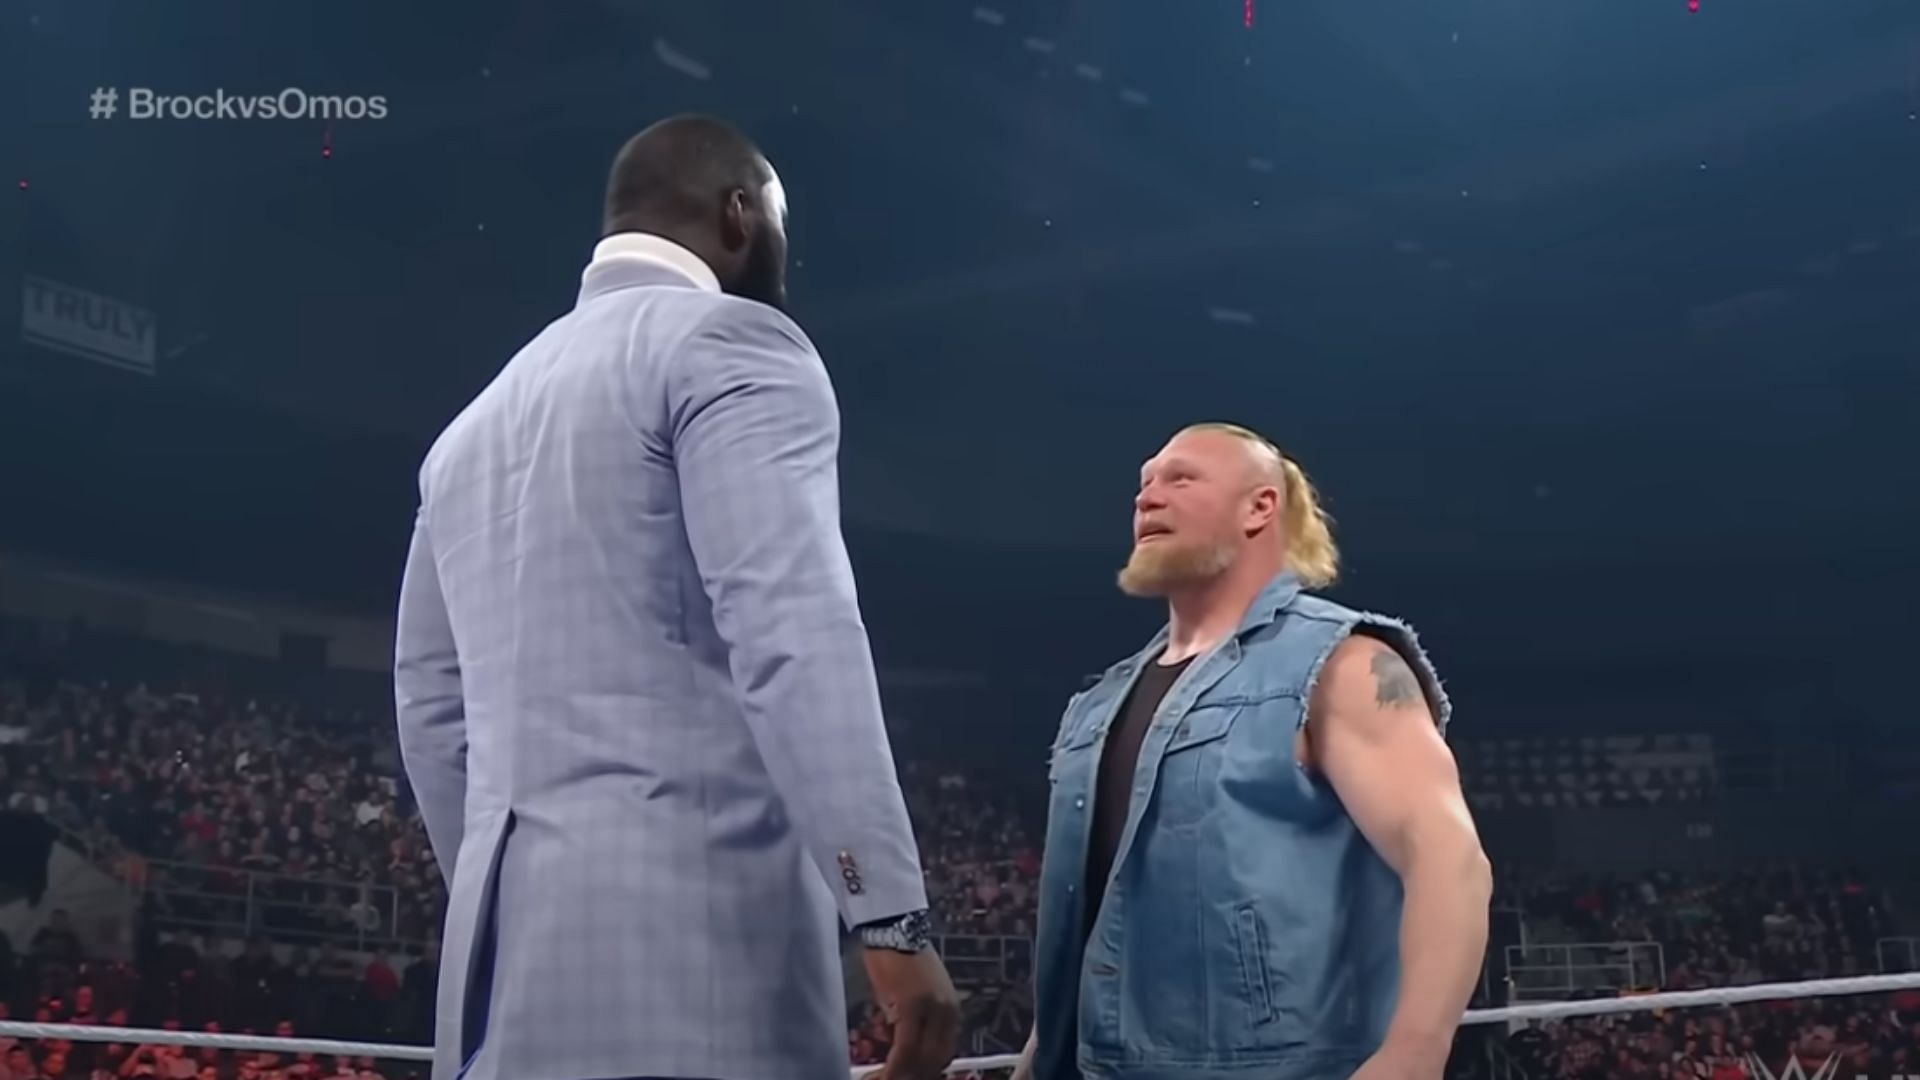 Omos (left) and Brock Lesnar (right)